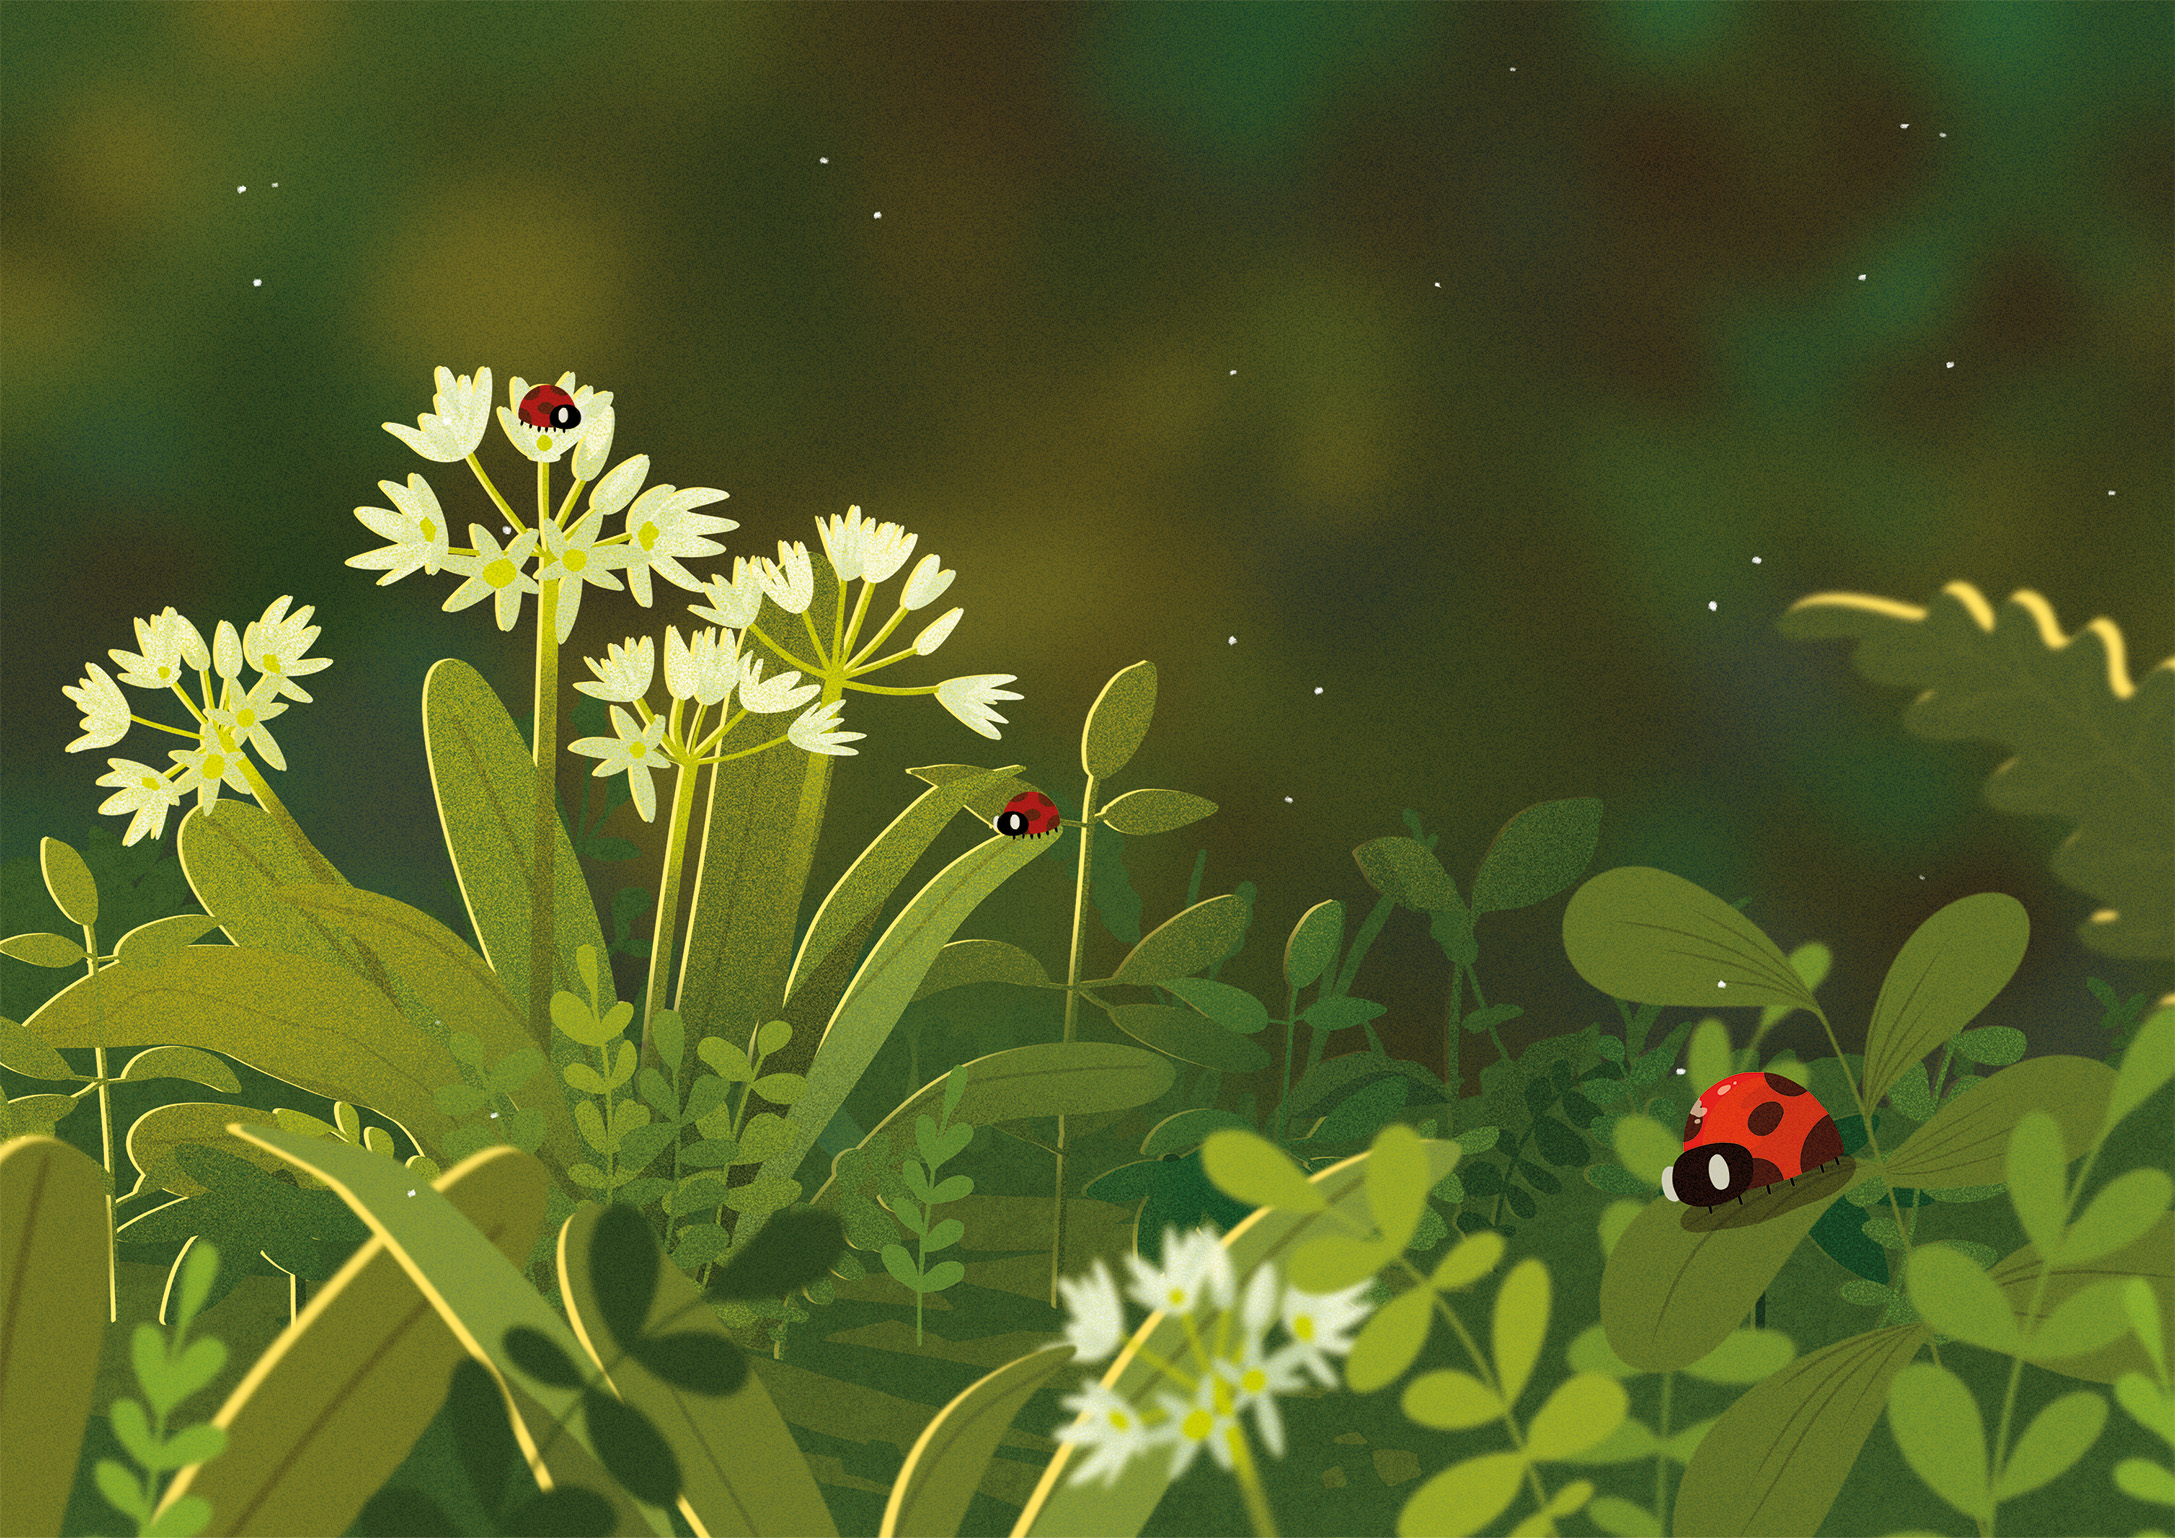 Close up illustration focusing on wild garlic with three ladybirds on the leaves, with a blurry background and foreground.